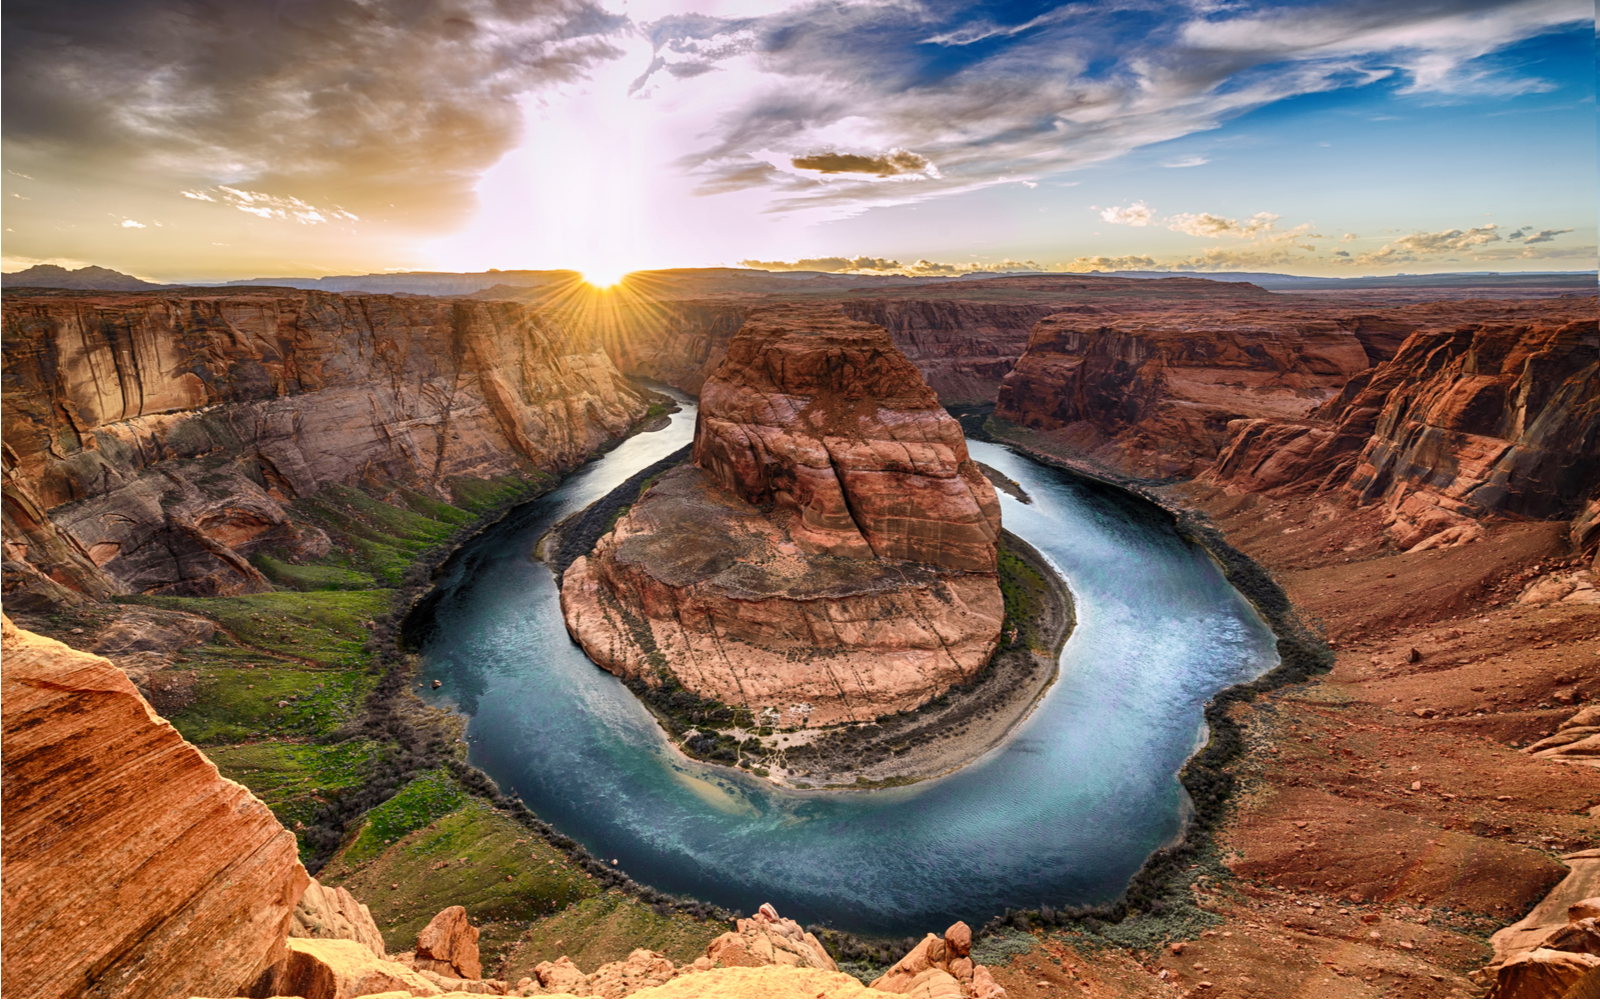 Horseshoe Bend pictured during the best time to visit the Grand Canyon with the sun setting on the day